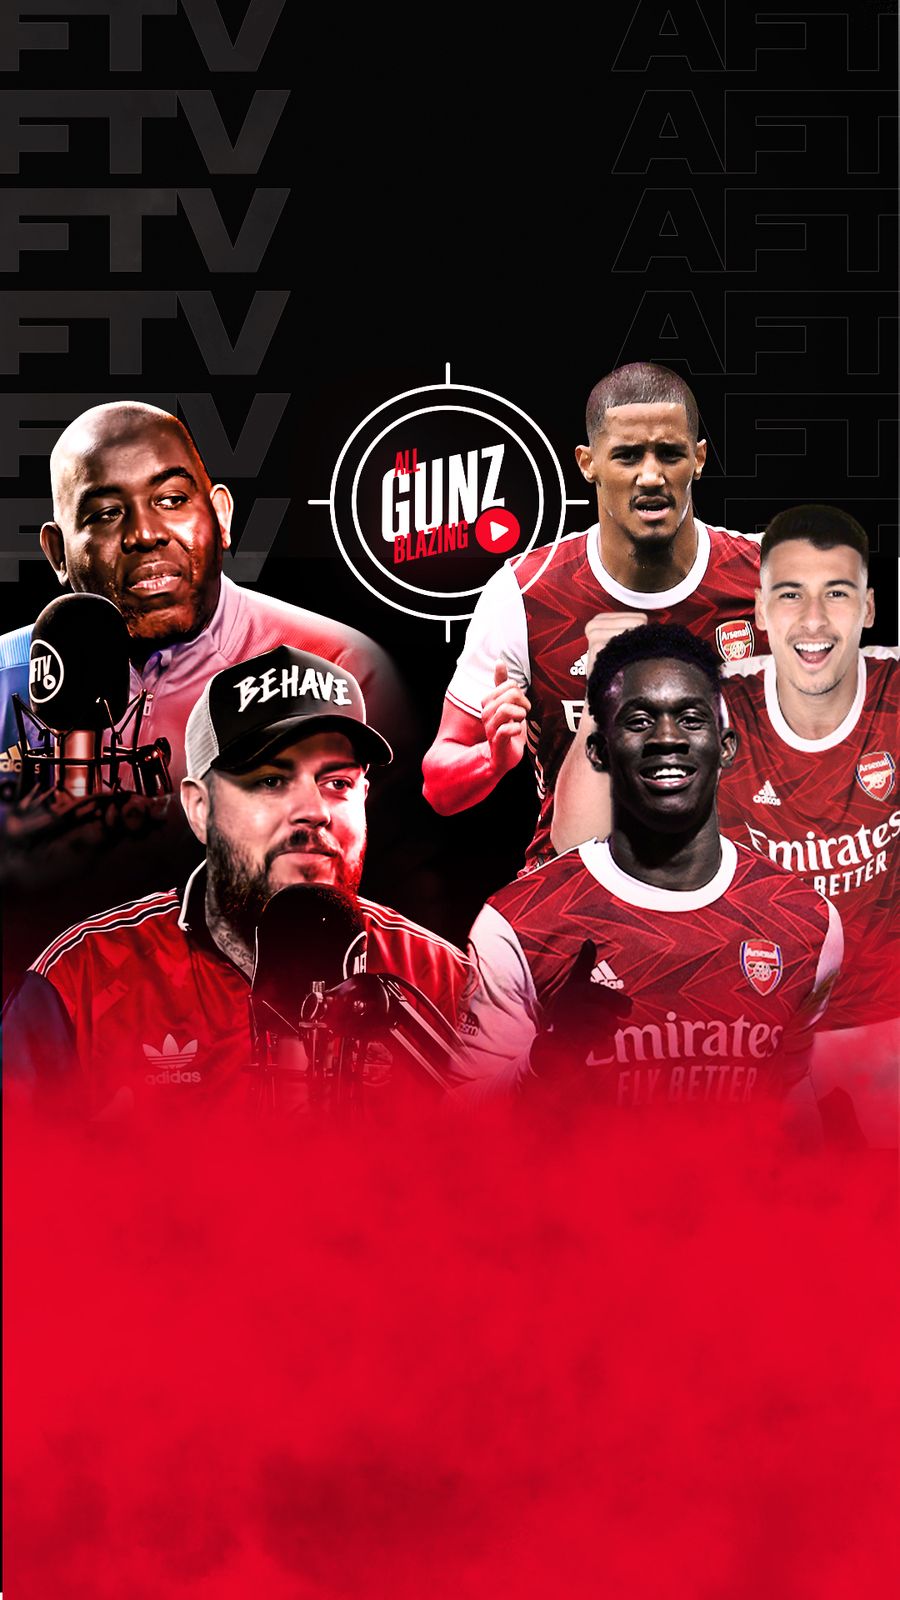 S3 Ep101: Is Arteta Ruining Our Young Talent? | All Gunz Blazing Podcast Ft. DT